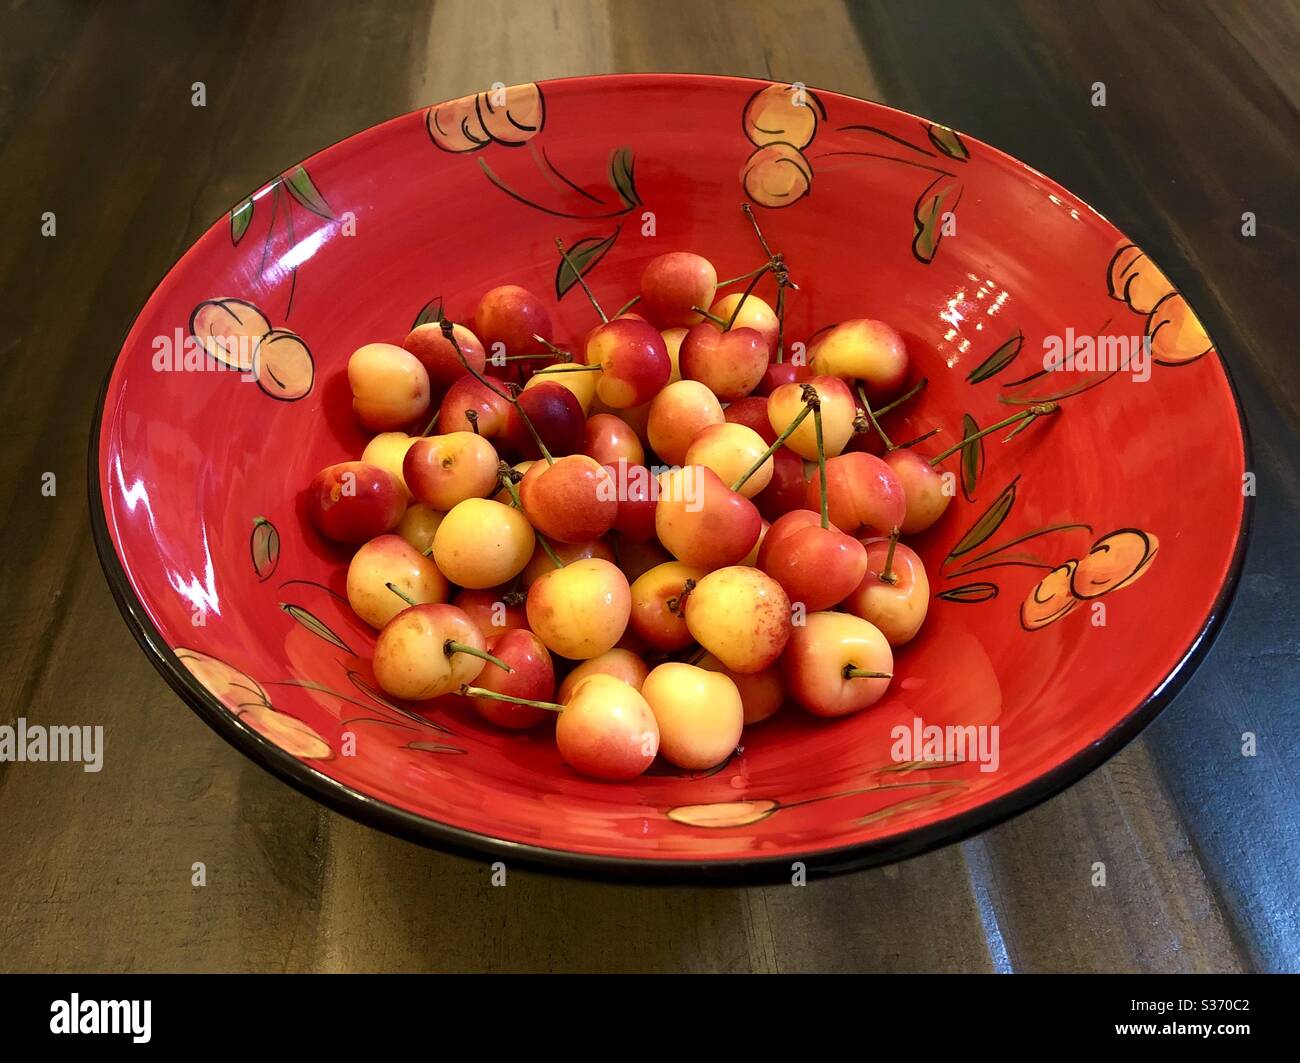 A bowl of rainier cherries in a ceramic bowl painted with a rainier cherry motif. Stock Photo